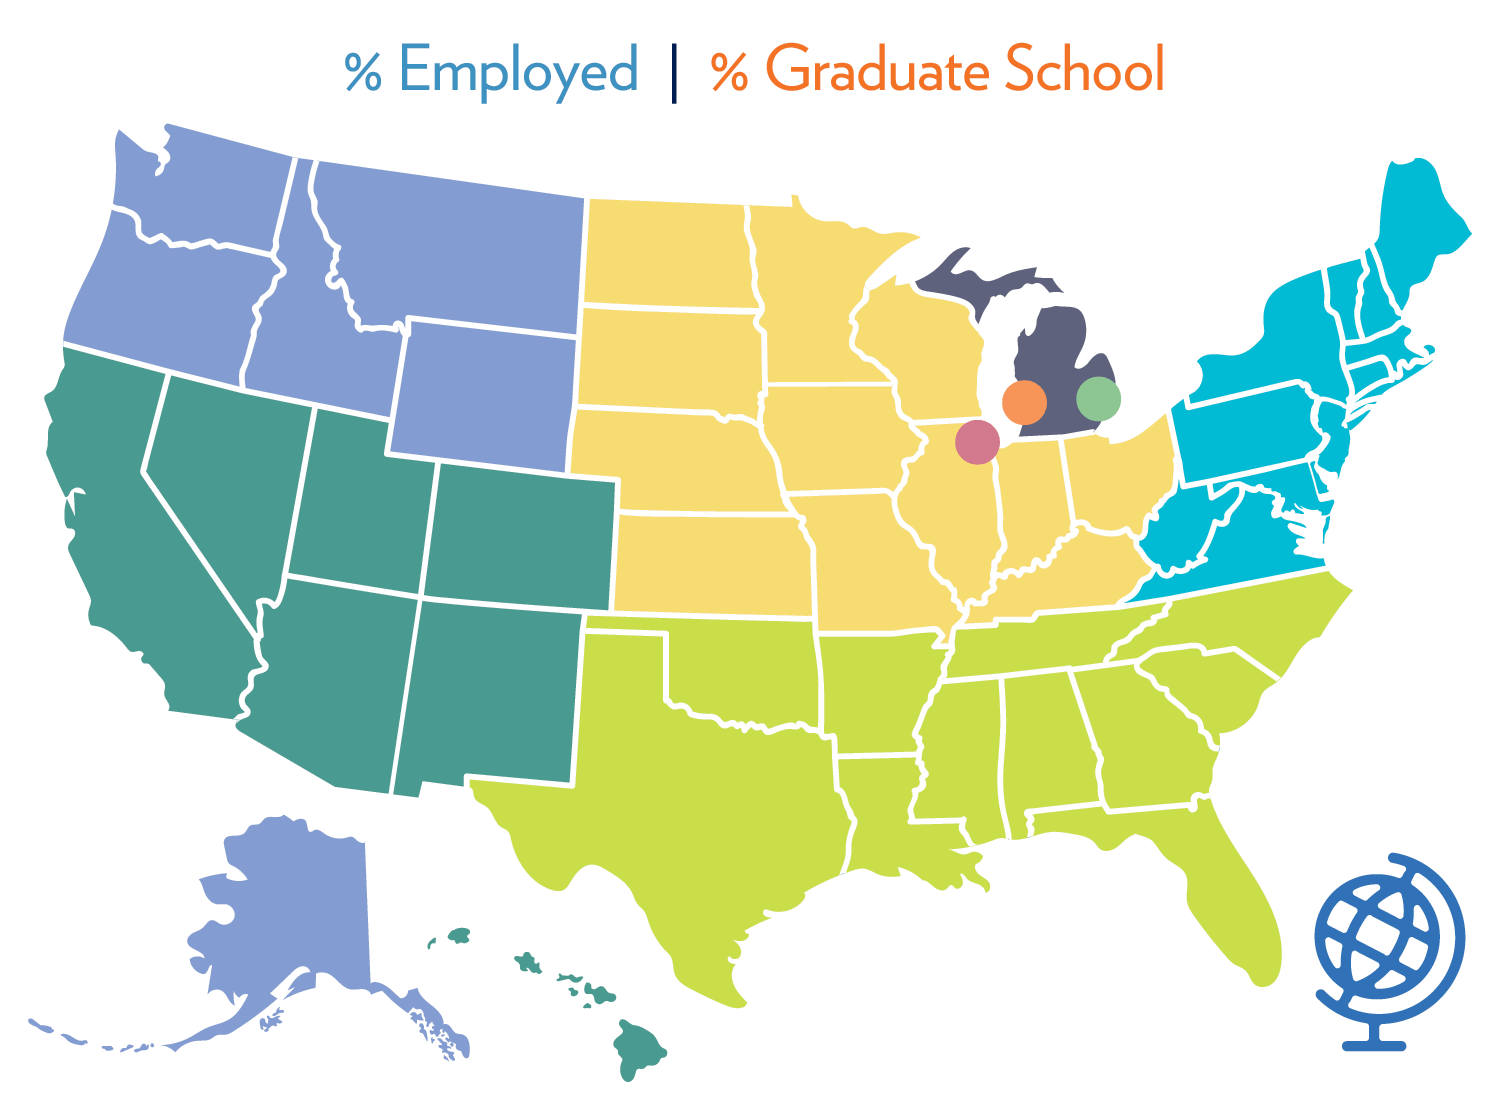 An image of the nation showing percentages by region of graduates who are employed or in grad school